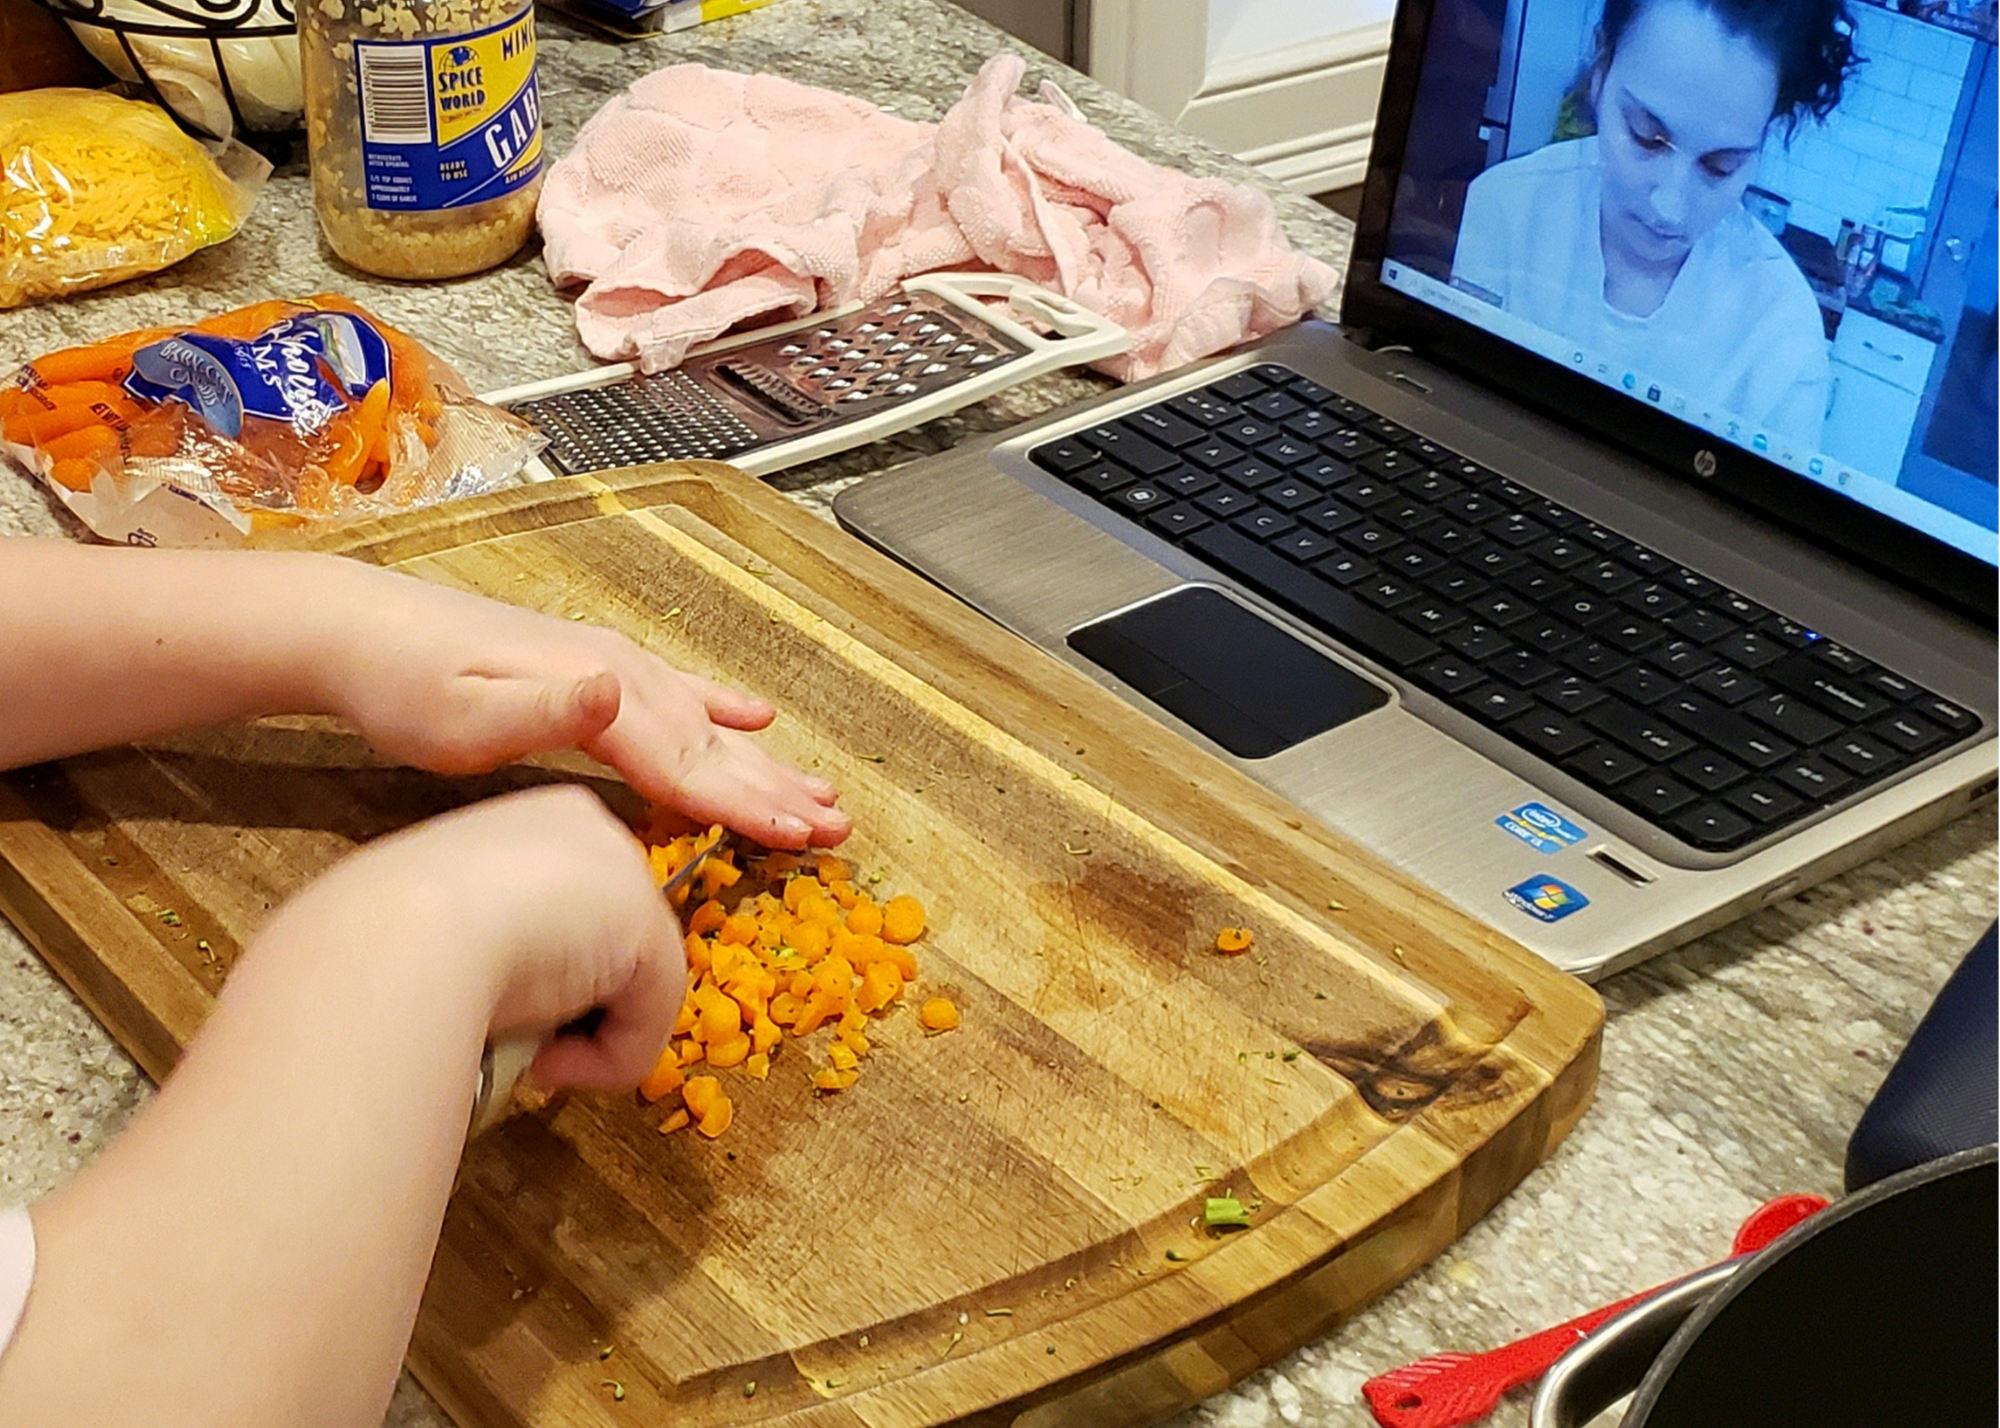 A child's hands are visible, cutting carrots on a wooded cutting board on a counter with cheese, garlic, more carrots, and a laptop with Food Explorers presenter Megan visible.